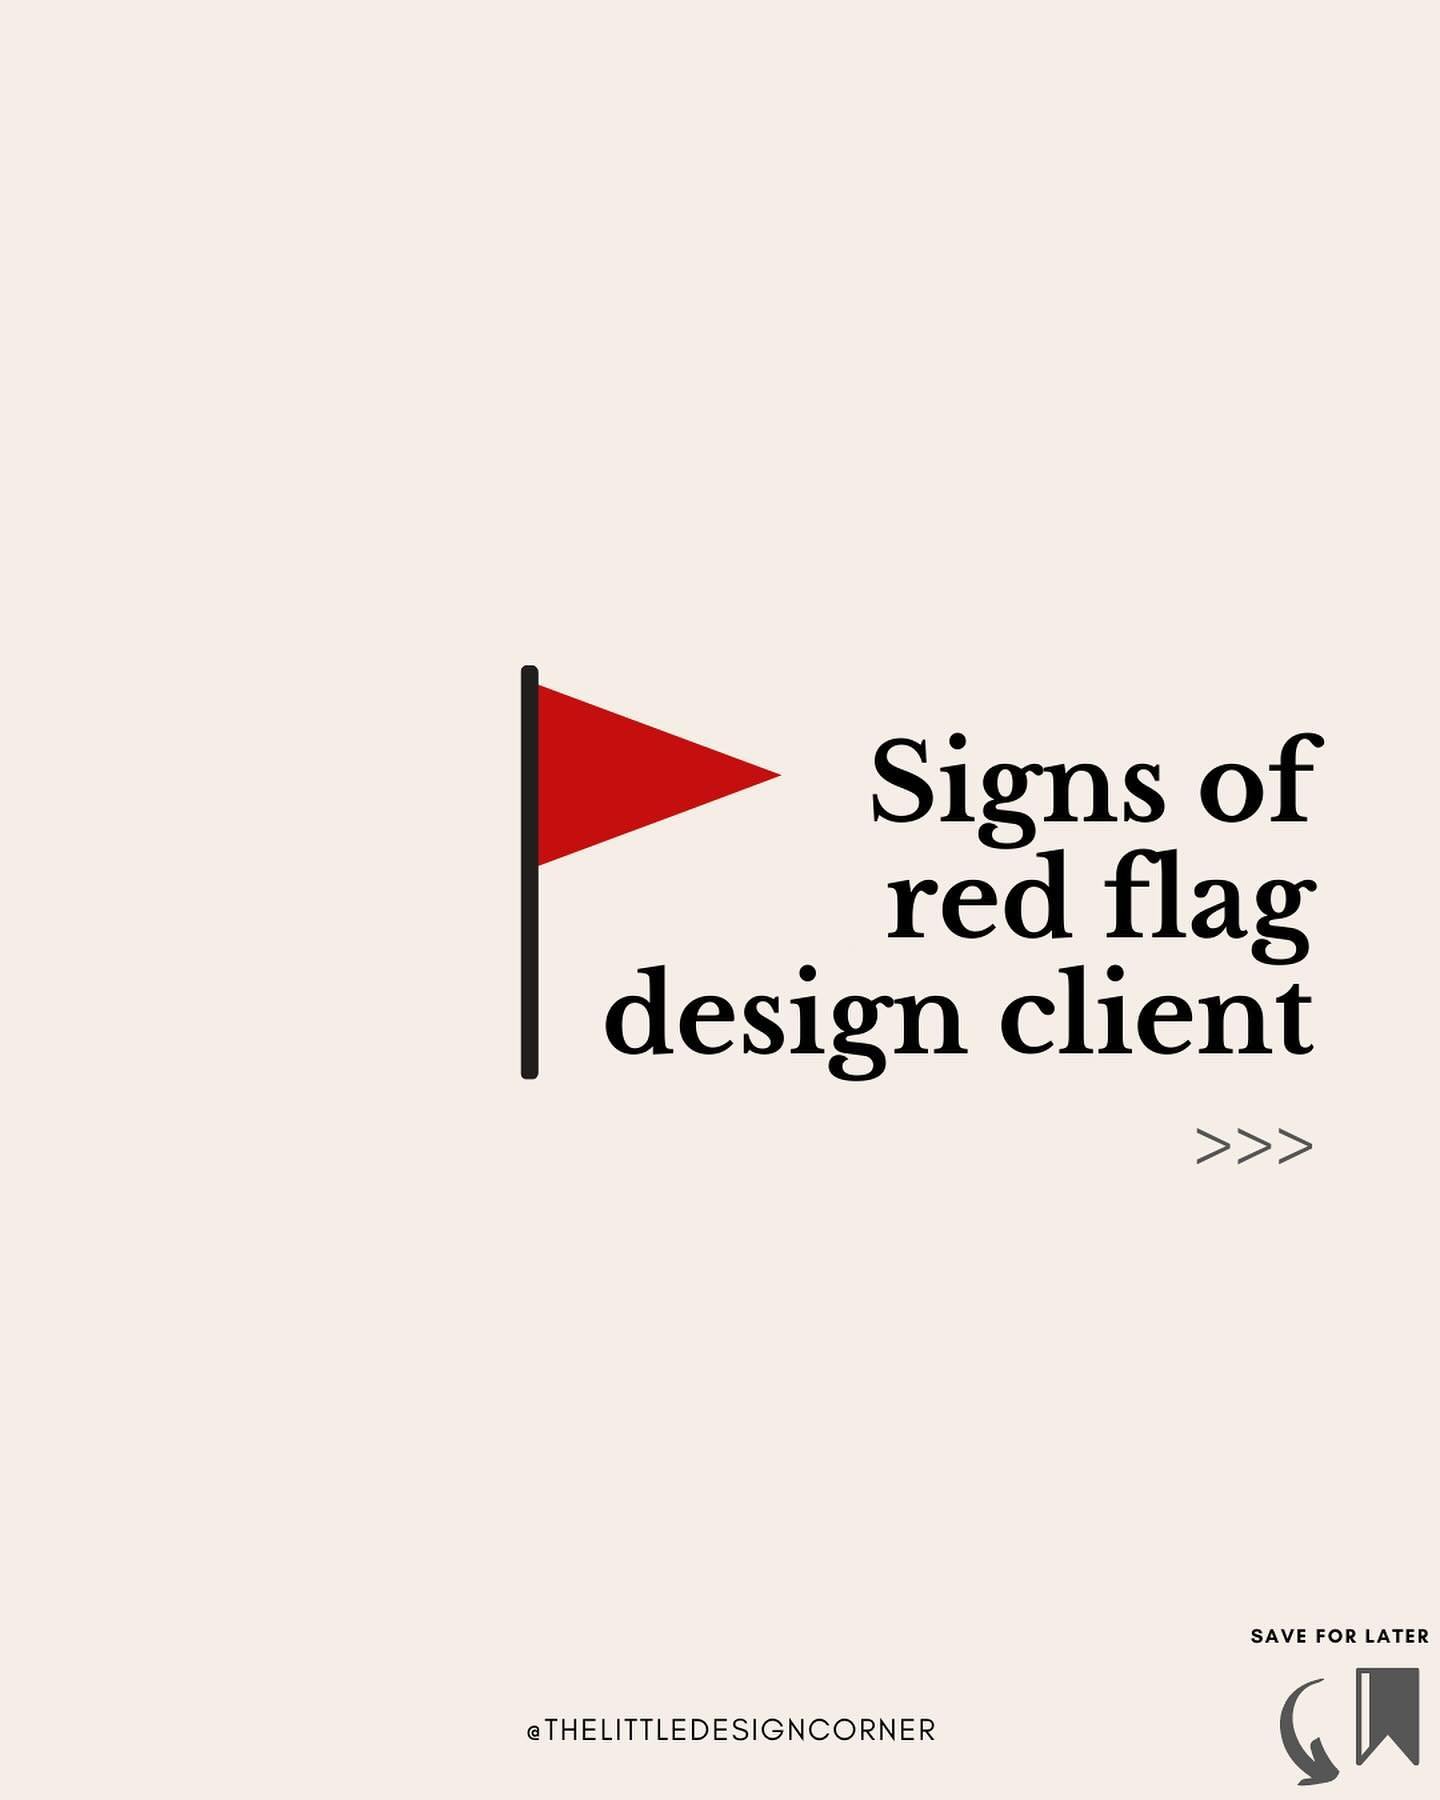 Not all clients are worth it!!! Here are some red flags to look out for 🚩⬇️

Remember that this is YOUR business and YOUR sanity. Don&rsquo;t feel you have to take on every client.

If something feels off during an initial meeting or you hear them s